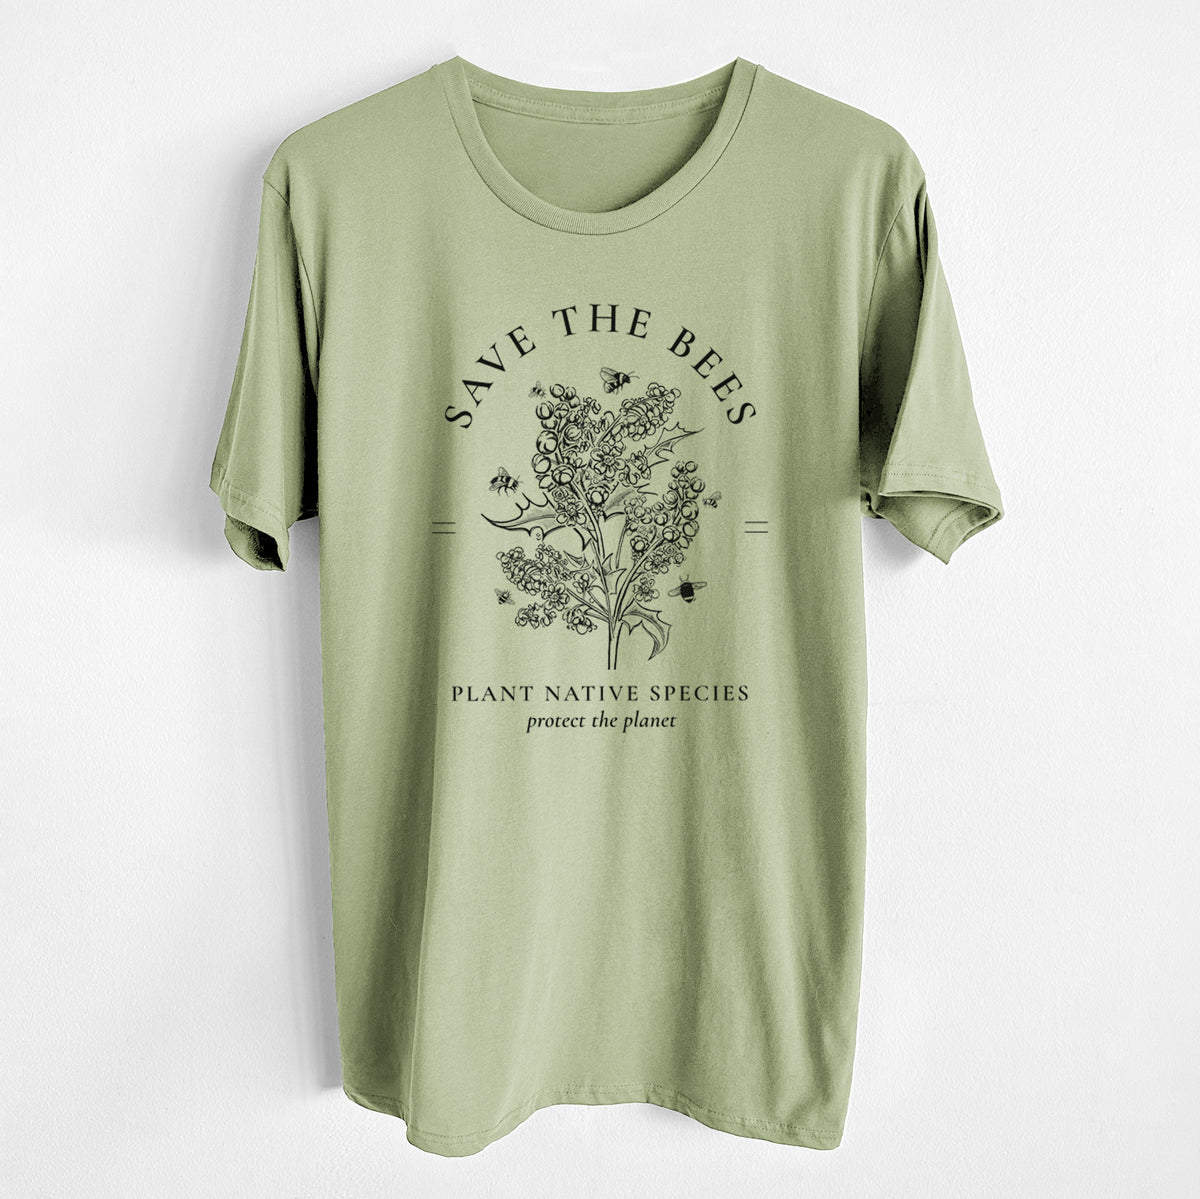 Save the Bees - Plant Native Species - Unisex Crewneck - Made in USA - 100% Organic Cotton